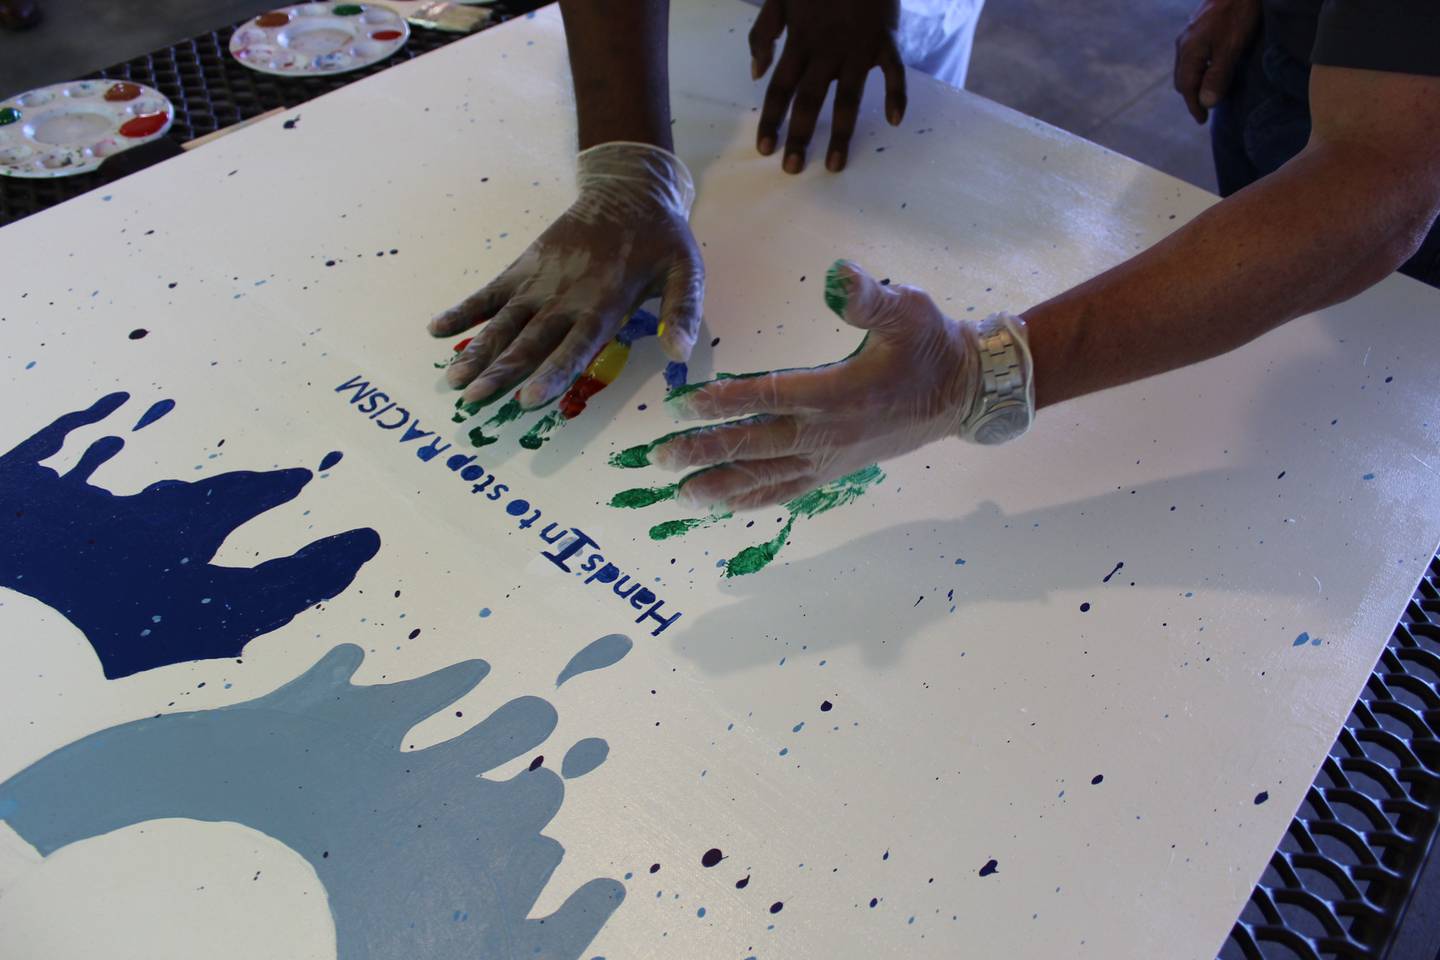 Cornerstone Services in Joliet held its first Juneteenth Friendship Festival on Wednesday, June 16, 2021. The event was an opportunity for people to learn ways to support each other and combat systemic racism.